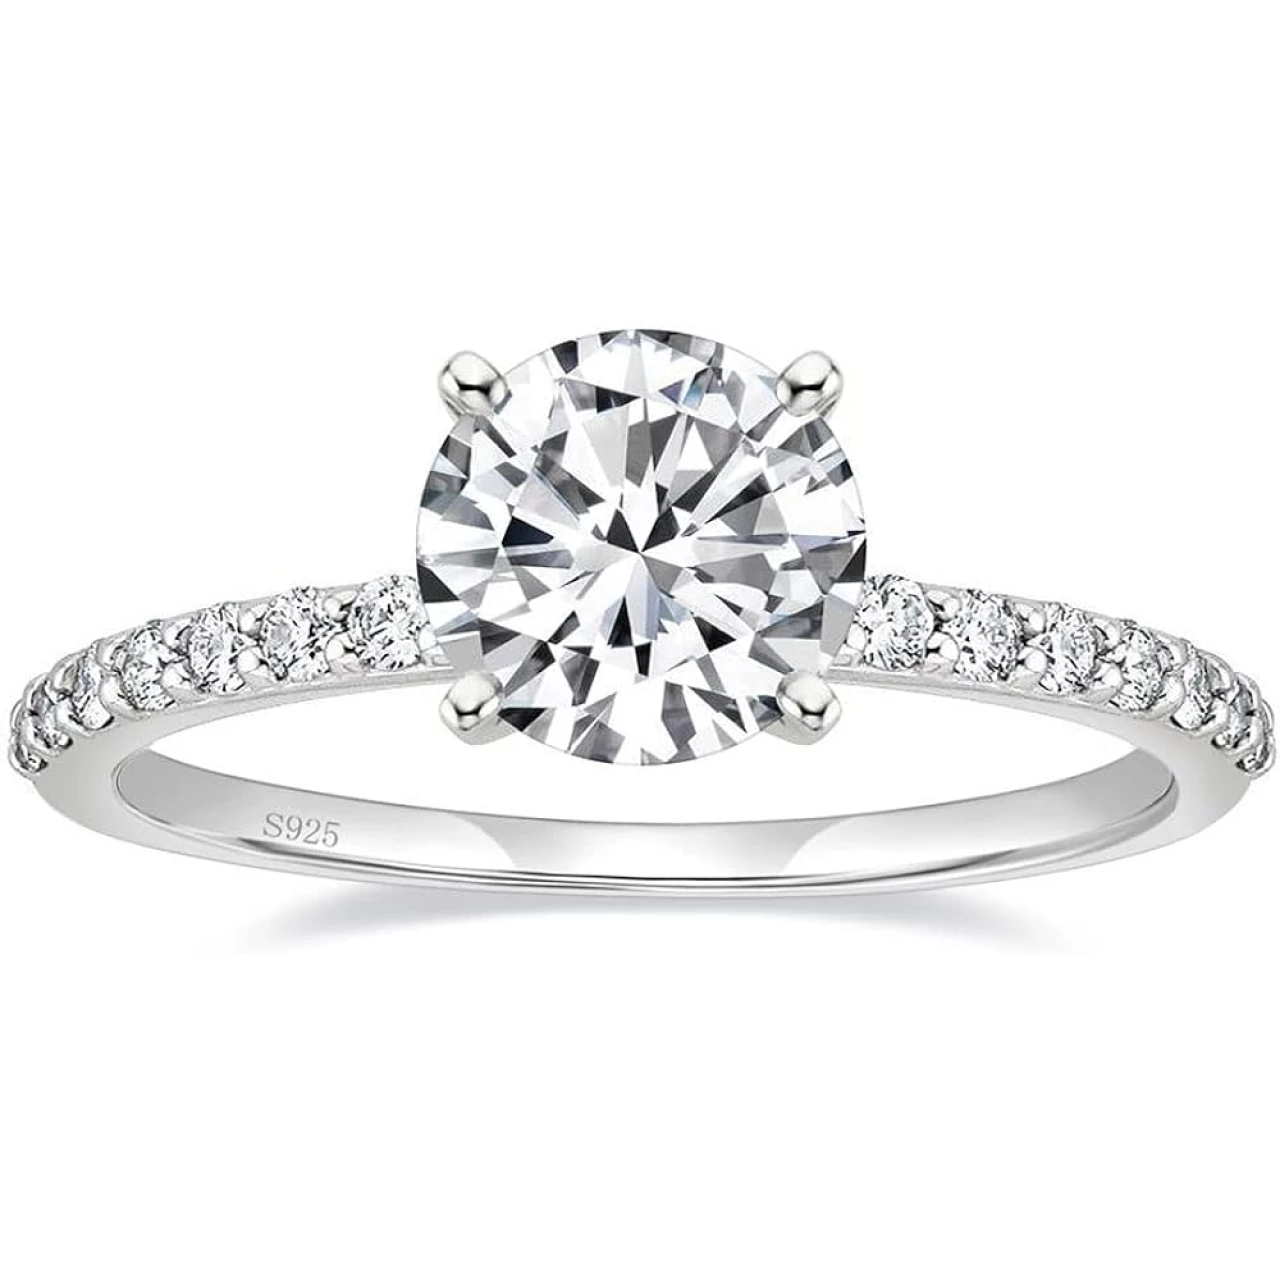 EAMTI 925 Sterling Silver 1.25 CT Round Solitaire Cubic Zirconia Engagement Ring Halo Promise Ring Size 3-13